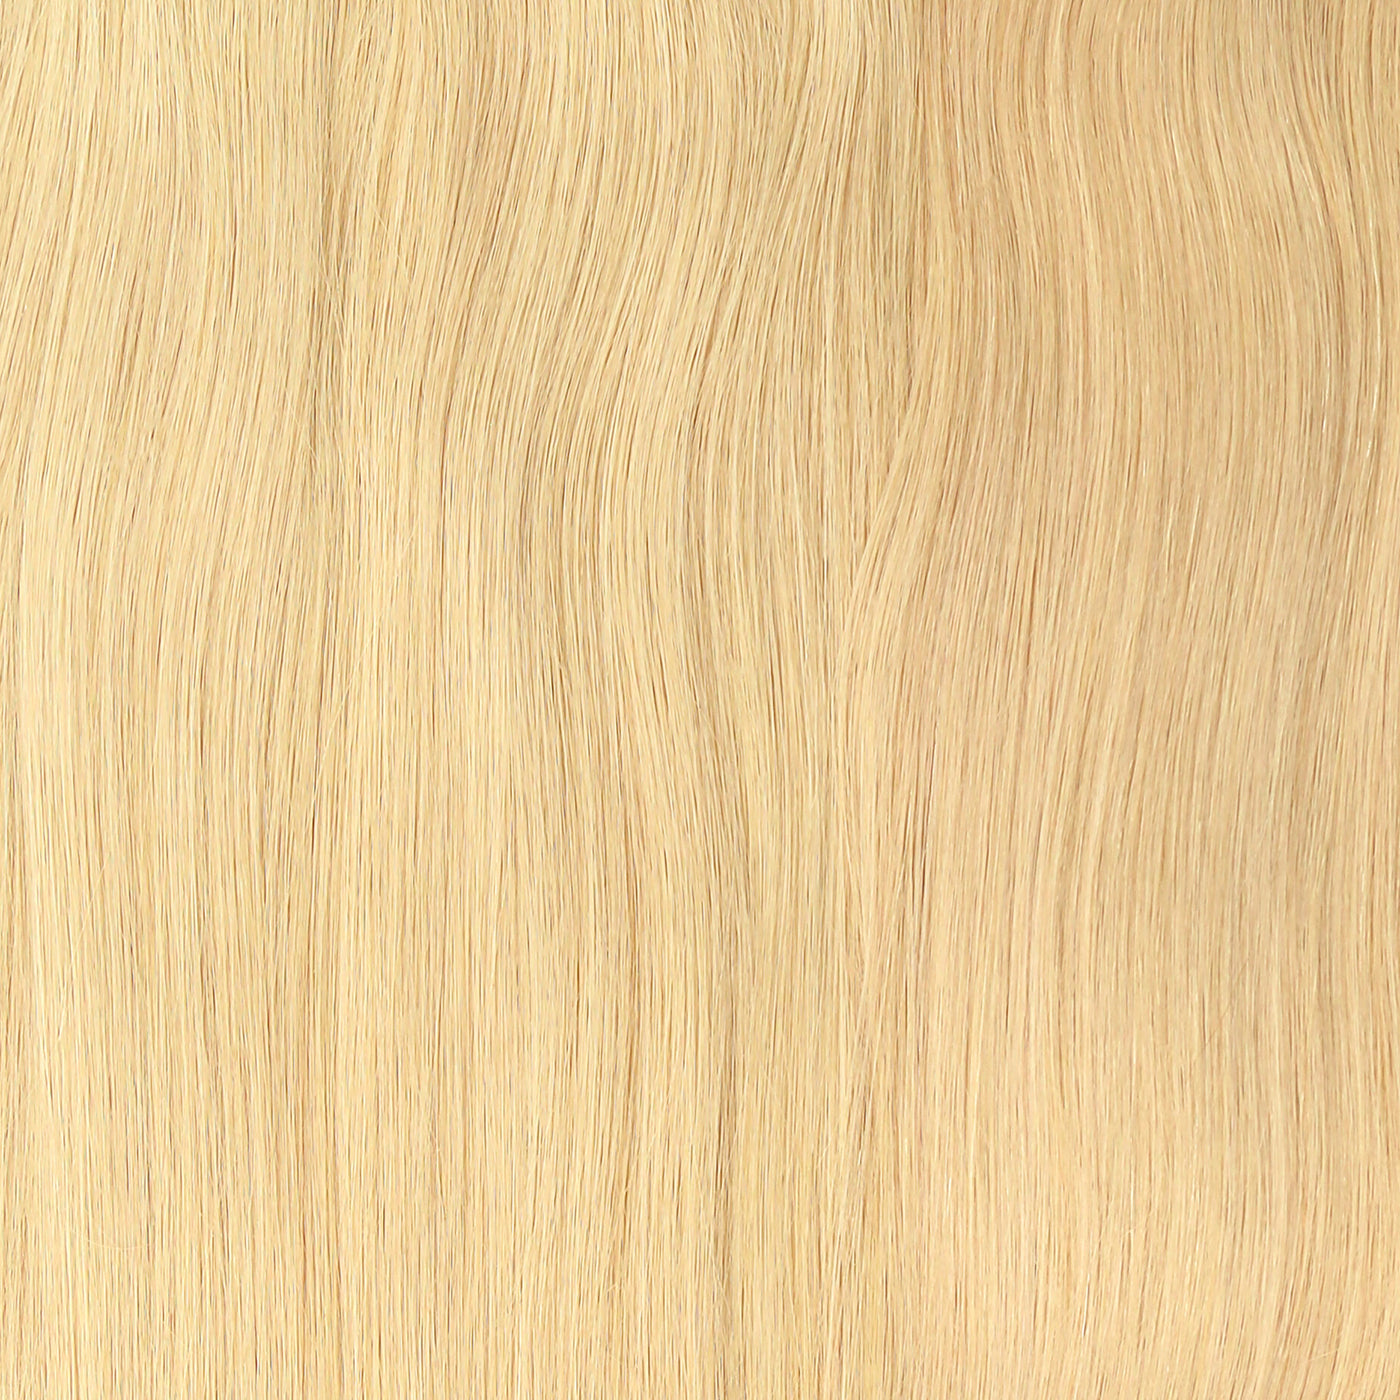 #16 Blonde AquaLyna Ponytail Hair Extension